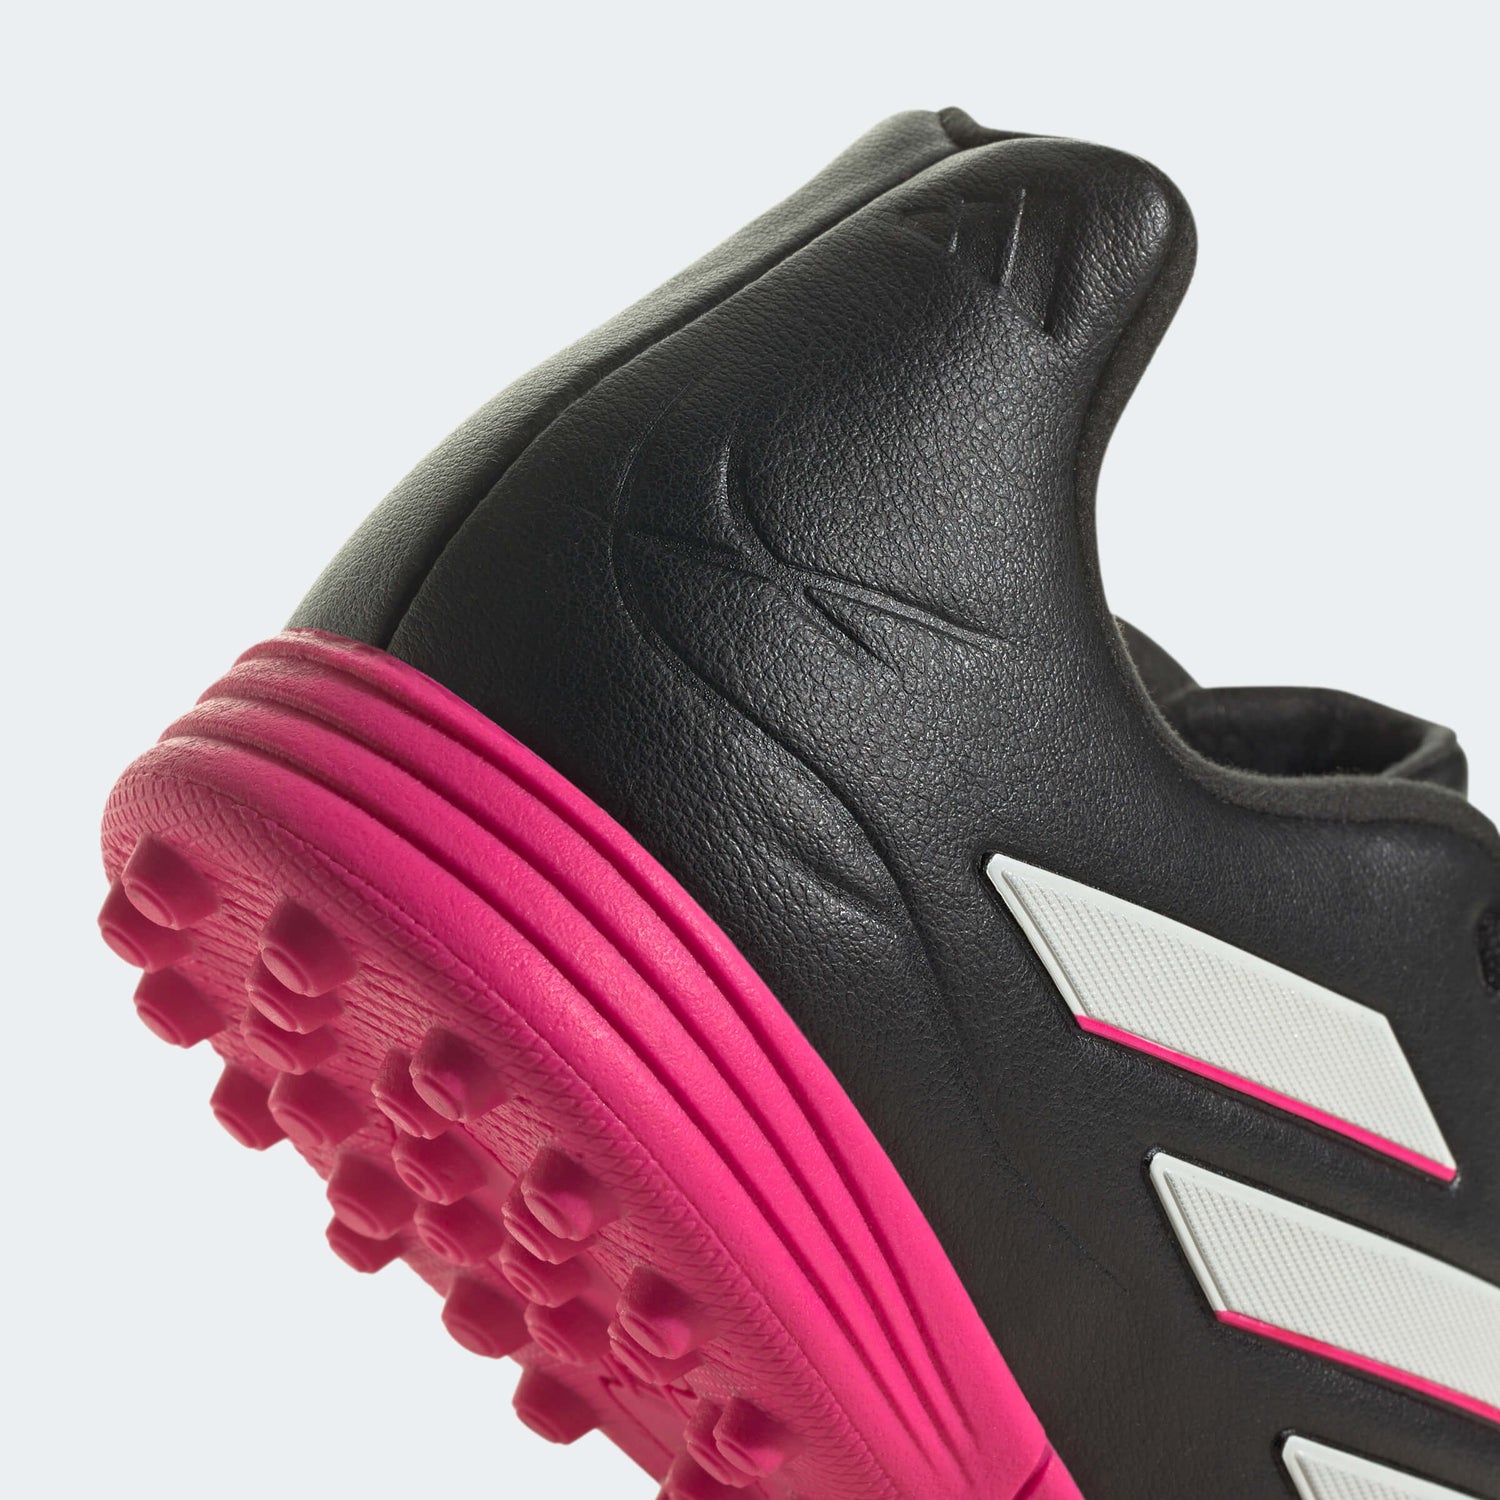 adidas JR Copa Pure.3 Turf - Own Your Football Pack (SP23) (Detail 2)